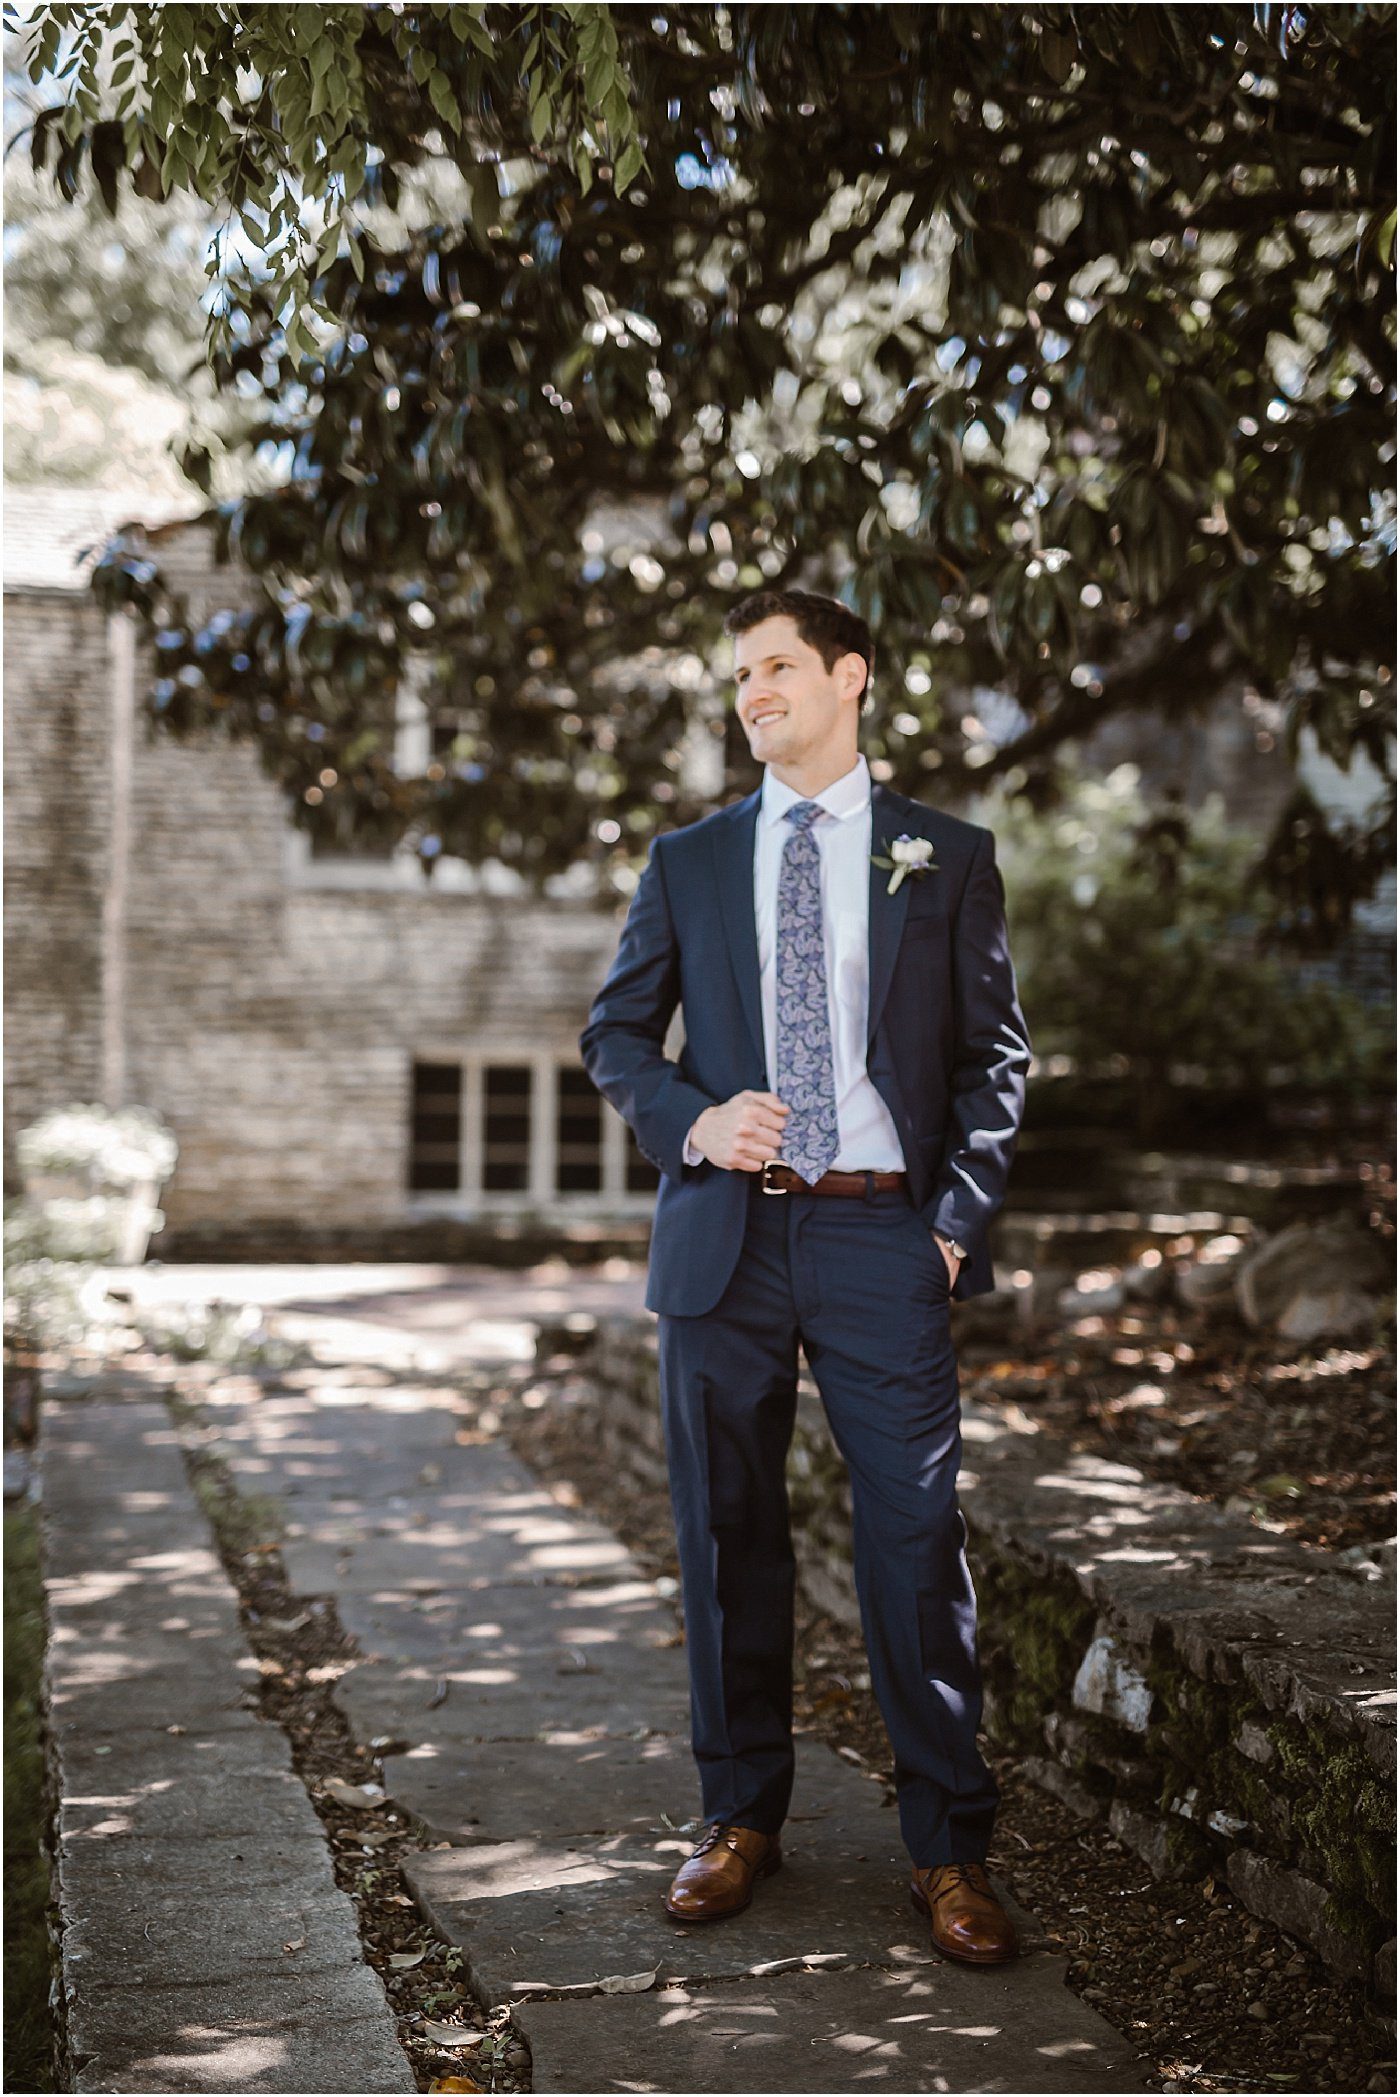 Weddings at the Knoxville Botanical Gardens